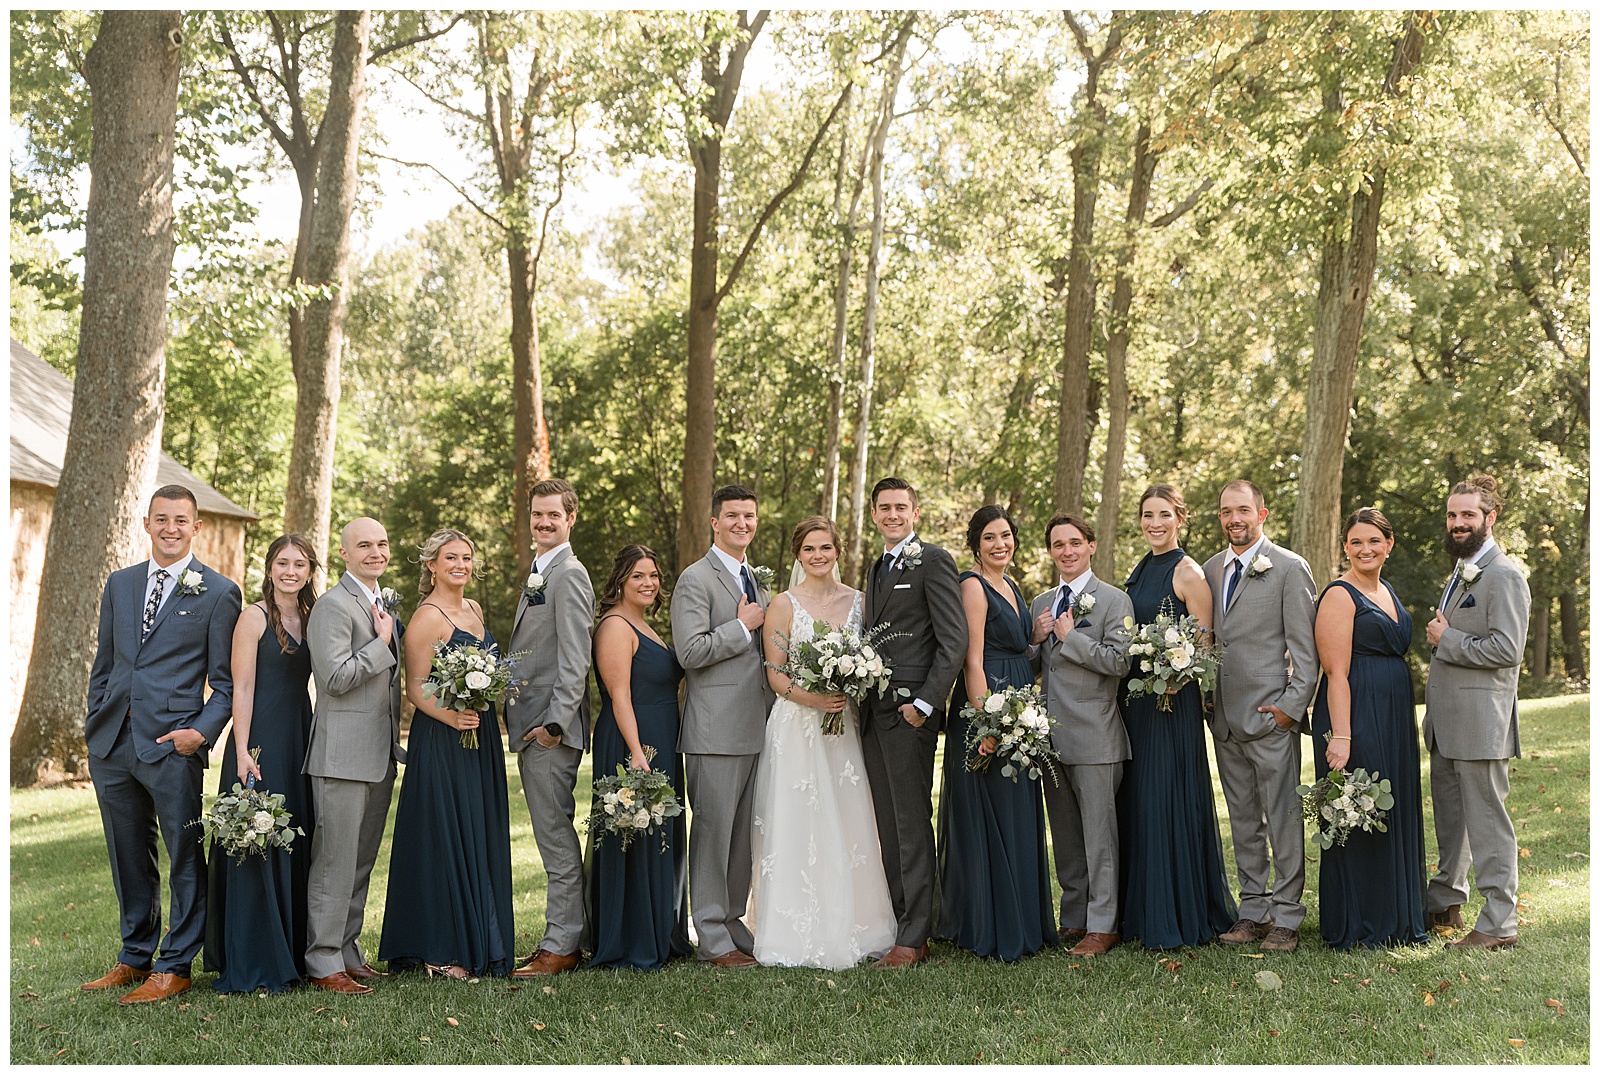 bride and groom standing in middle with their bridal party standing with a partner in opposite directions at elizabeth furnace